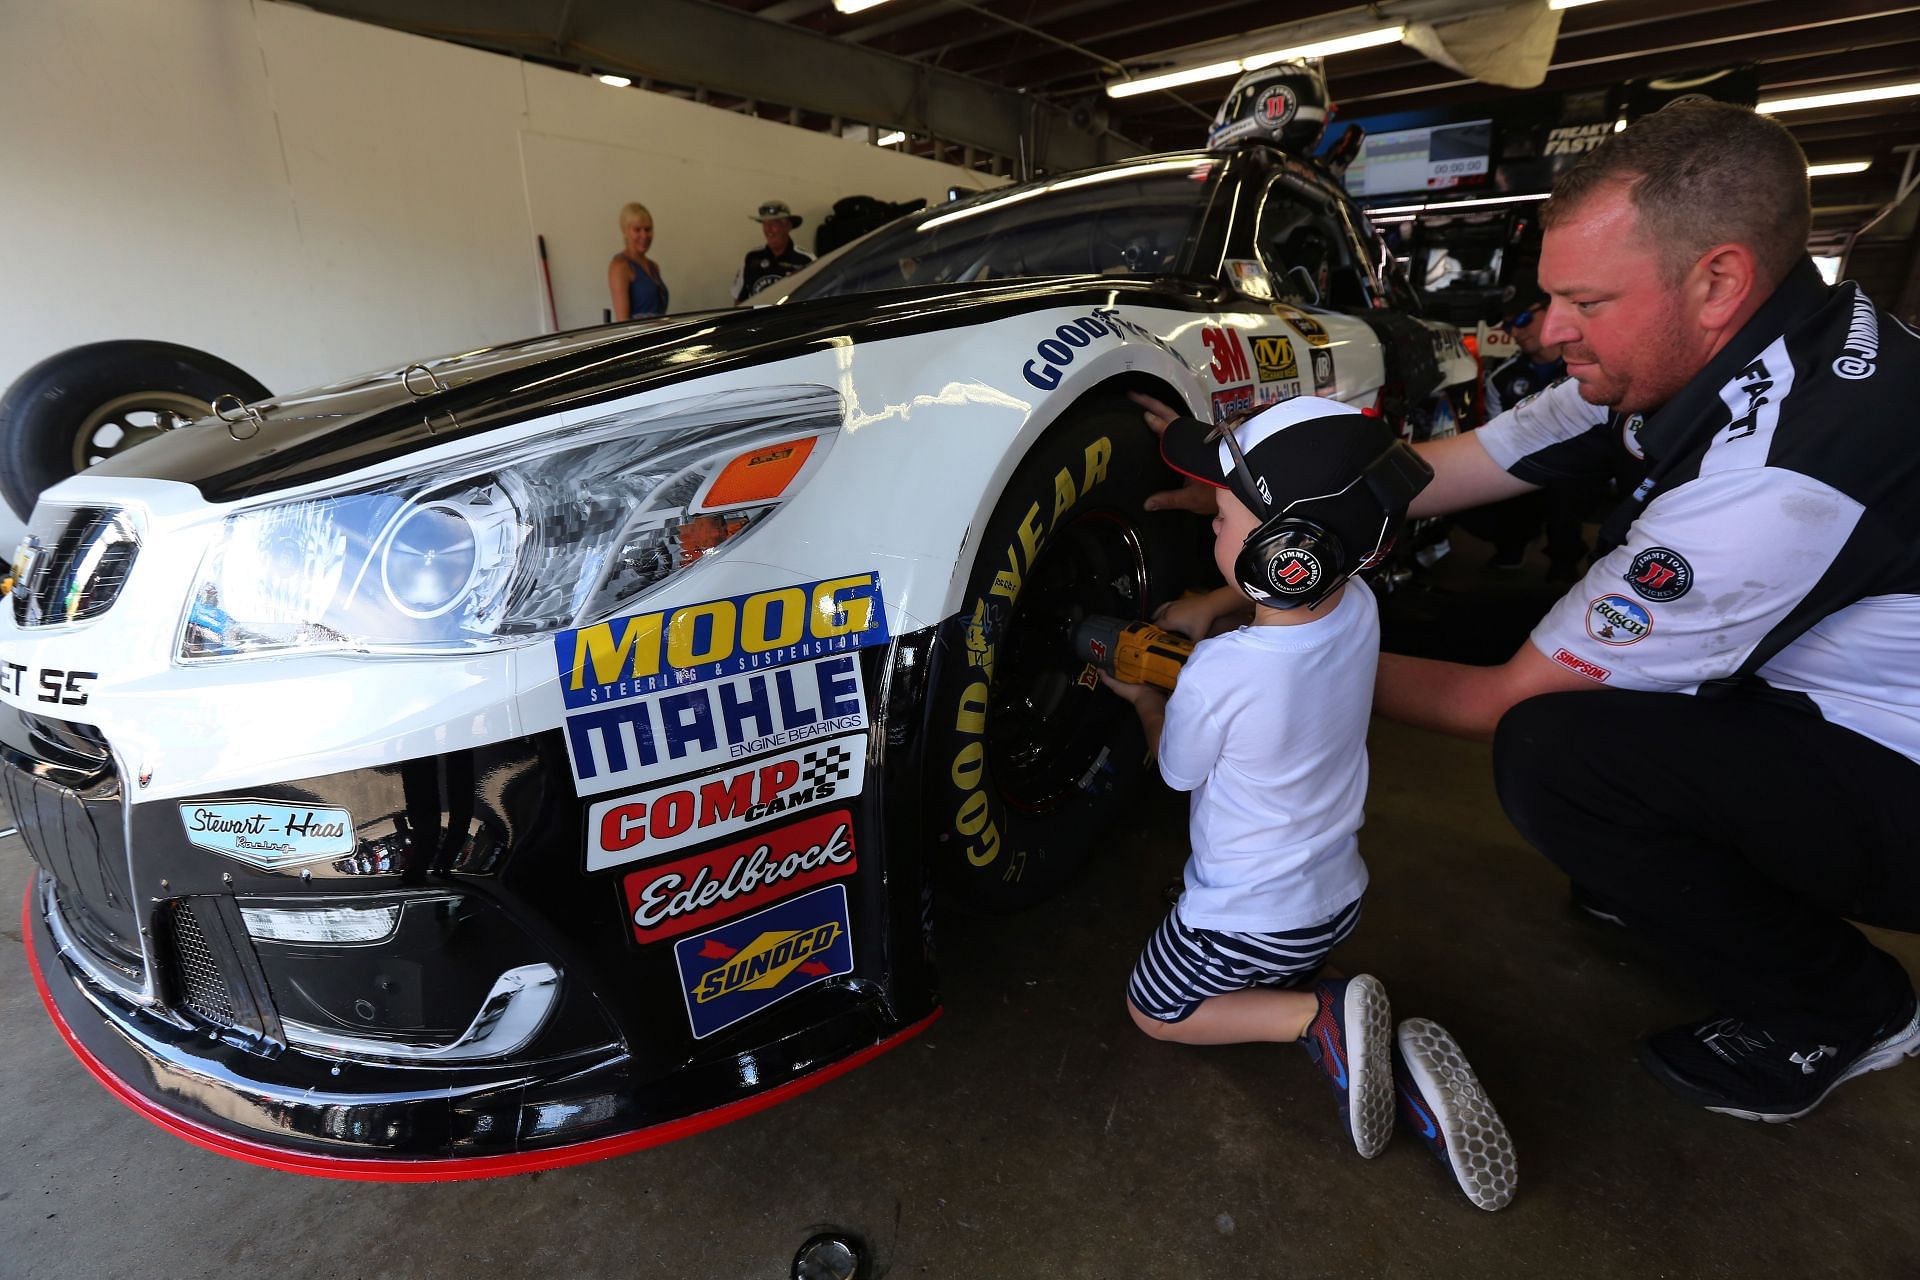 Keelan Harvick, son of Kevin Harvick, works on his dad&#039;s car in the garage area during practice for the 2016 NASCAR Sprint Cup Series New Hampshire 301 at New Hampshire Motor Speedway in Loudon, New Hampshire. (Photo by Jerry Markland/Getty Images)